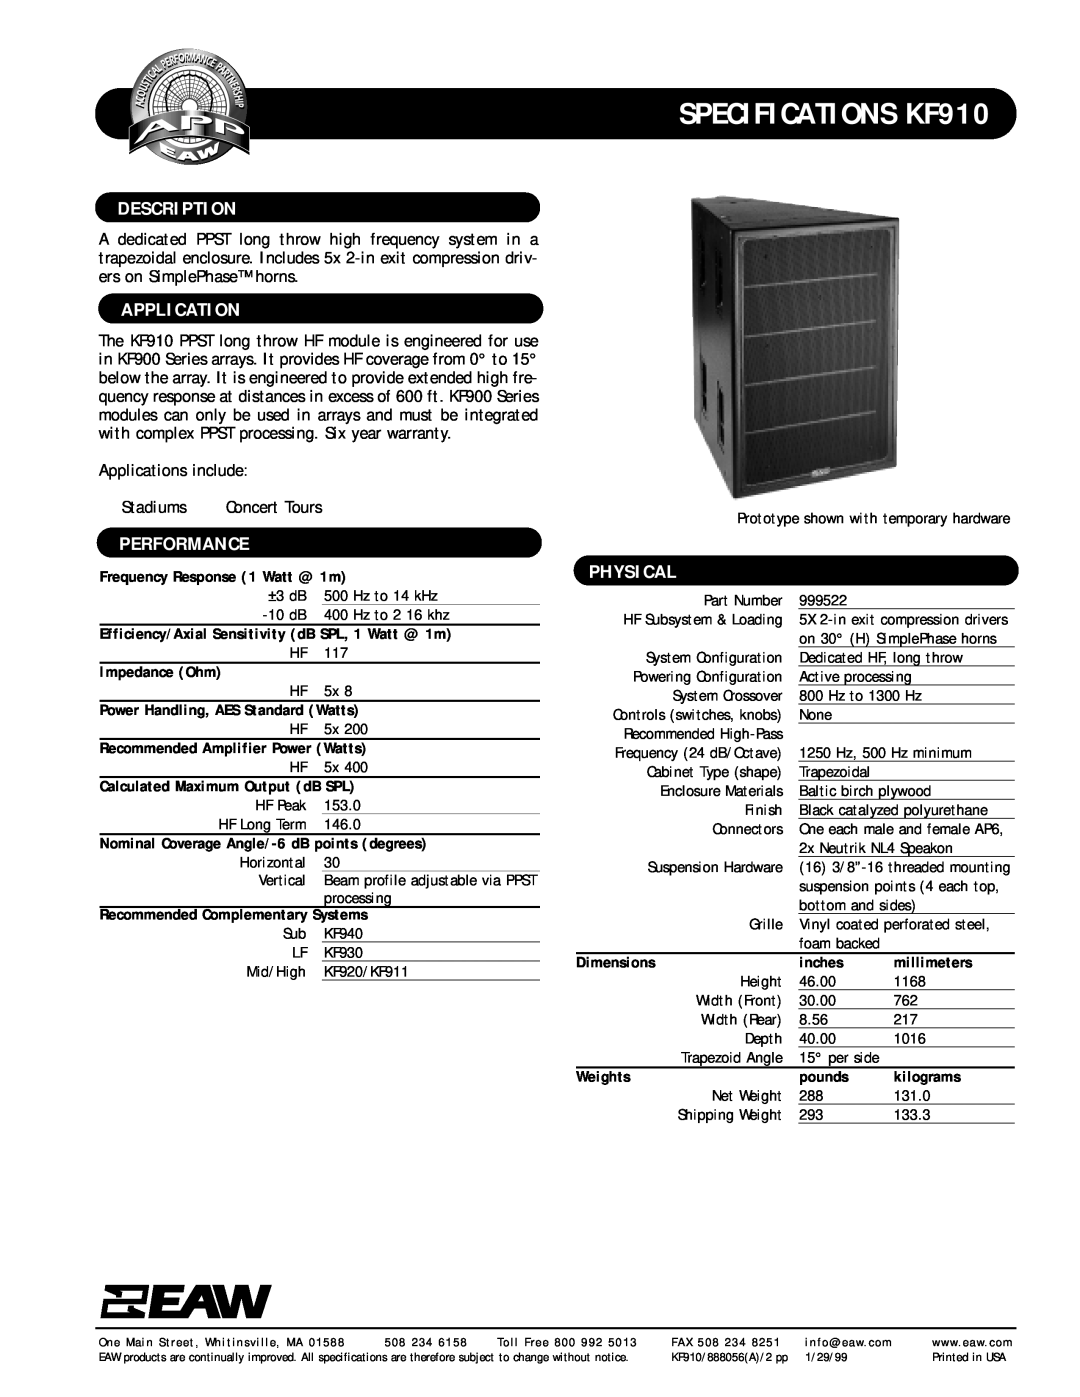 EAW specifications SPECIFICATIONS KF910, Description, Application, Performance, Physical 